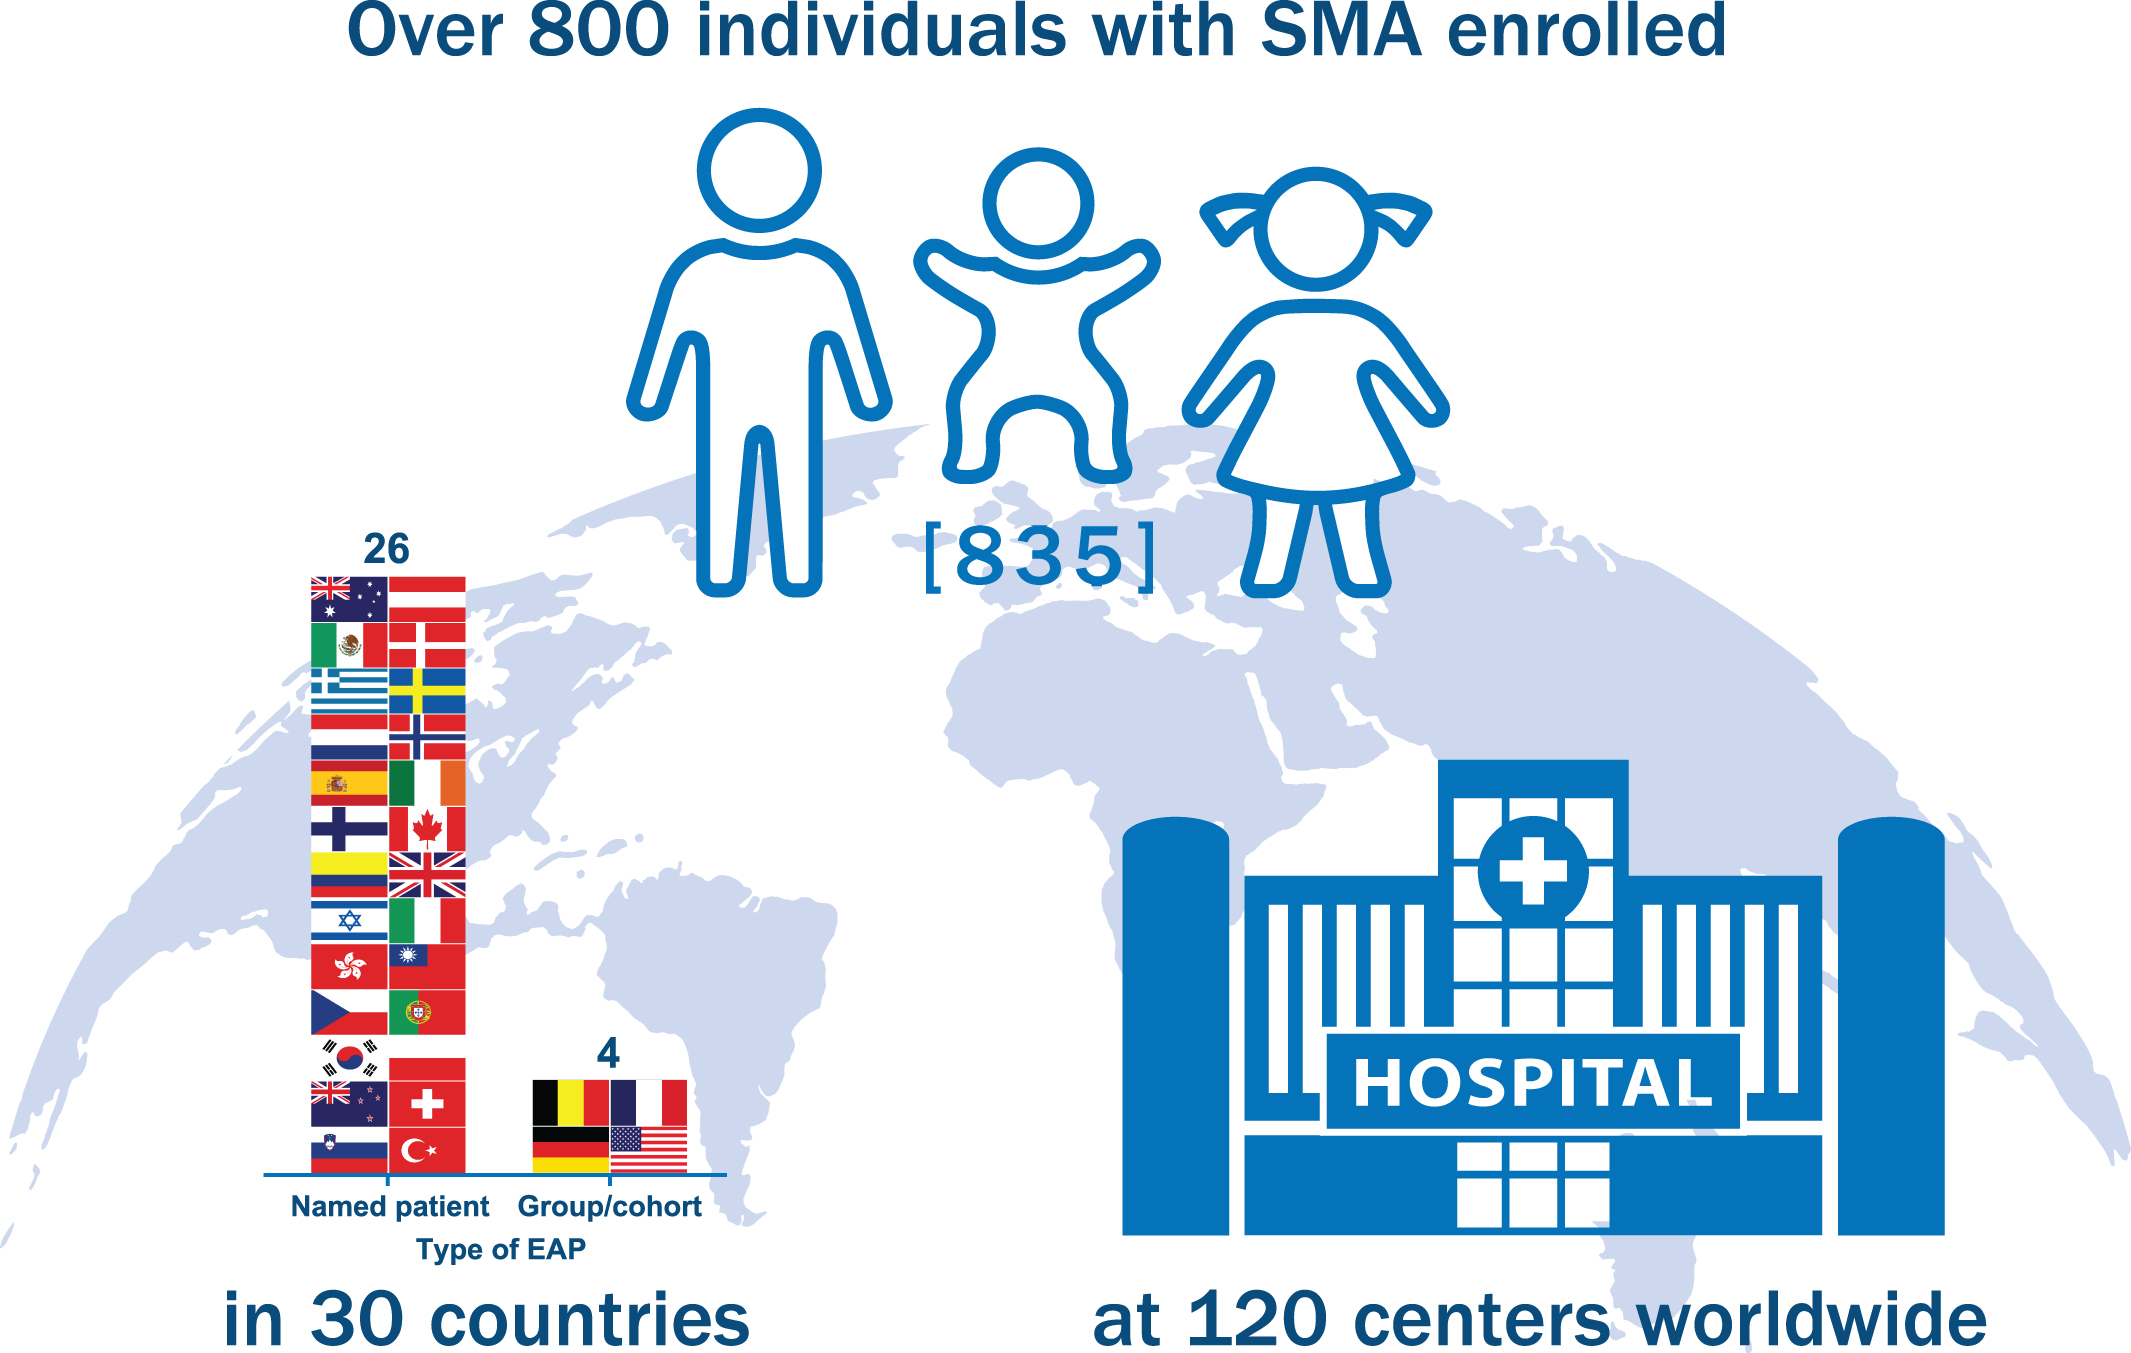 Nusinersen expanded access program (EAP) enrollment. The nusinersen EAP has become one of the largest in rare disease history, enrolling 835 individuals with spinal muscular atrophy (SMA) in 120 centers across 30 countries as of September 20, 2018. Countries utilizing a Named Patient EAP mechanism included Australia, Austria, Canada, Colombia, Czech Republic, Denmark, Finland, Greece, Hong Kong, Ireland, Israel, Italy, Mexico, Netherlands, New Zealand, Norway, Poland, Portugal, Slovenia, South Korea, Spain, Sweden, Switzerland, Taiwan, Turkey, and the United Kingdom. Countries utilizing a Group/Cohort EAP mechanism included Belgium, France, Germany, and the United States. Of note, France initiated EAP participation using a Named Patient program (Nominative temporary authorization for use [ATU]) and later transitioned to a Group/Cohort program (Cohort ATU).